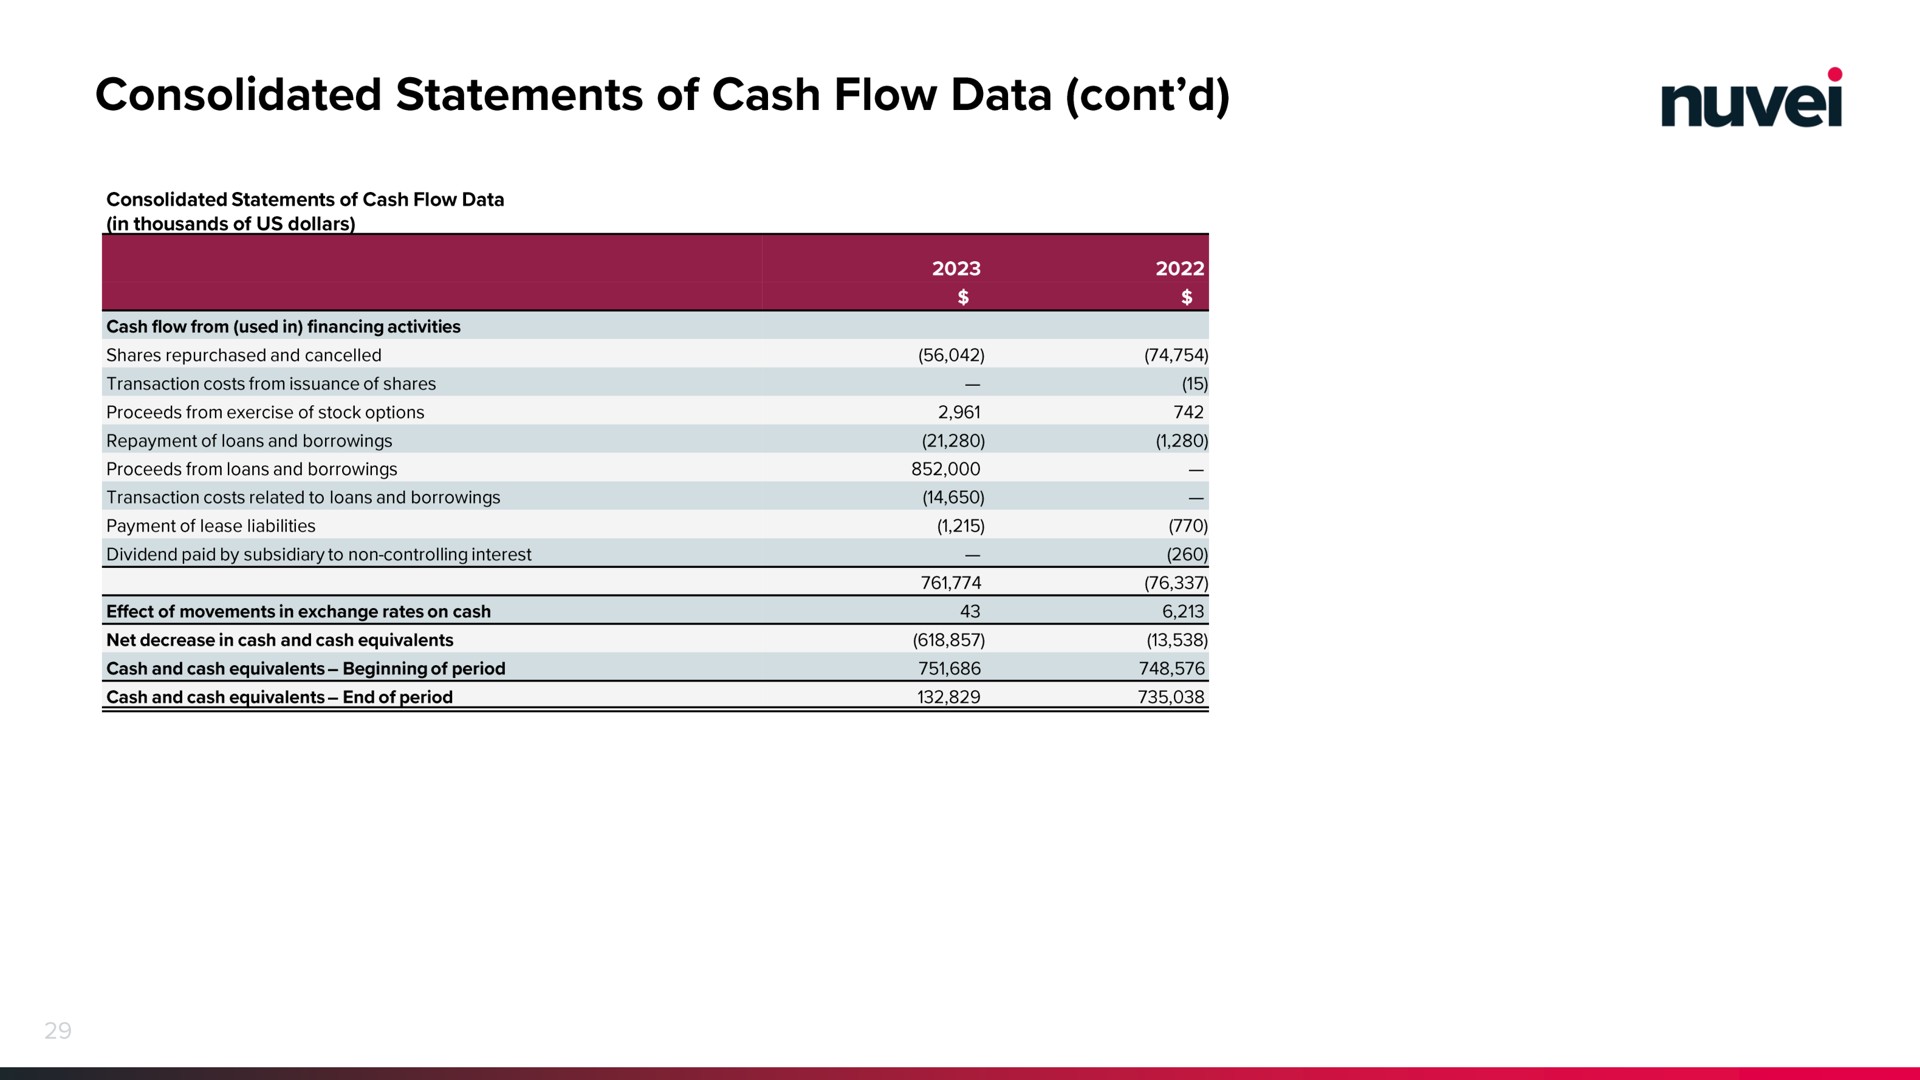 consolidated statements of cash flow data | Nuvei